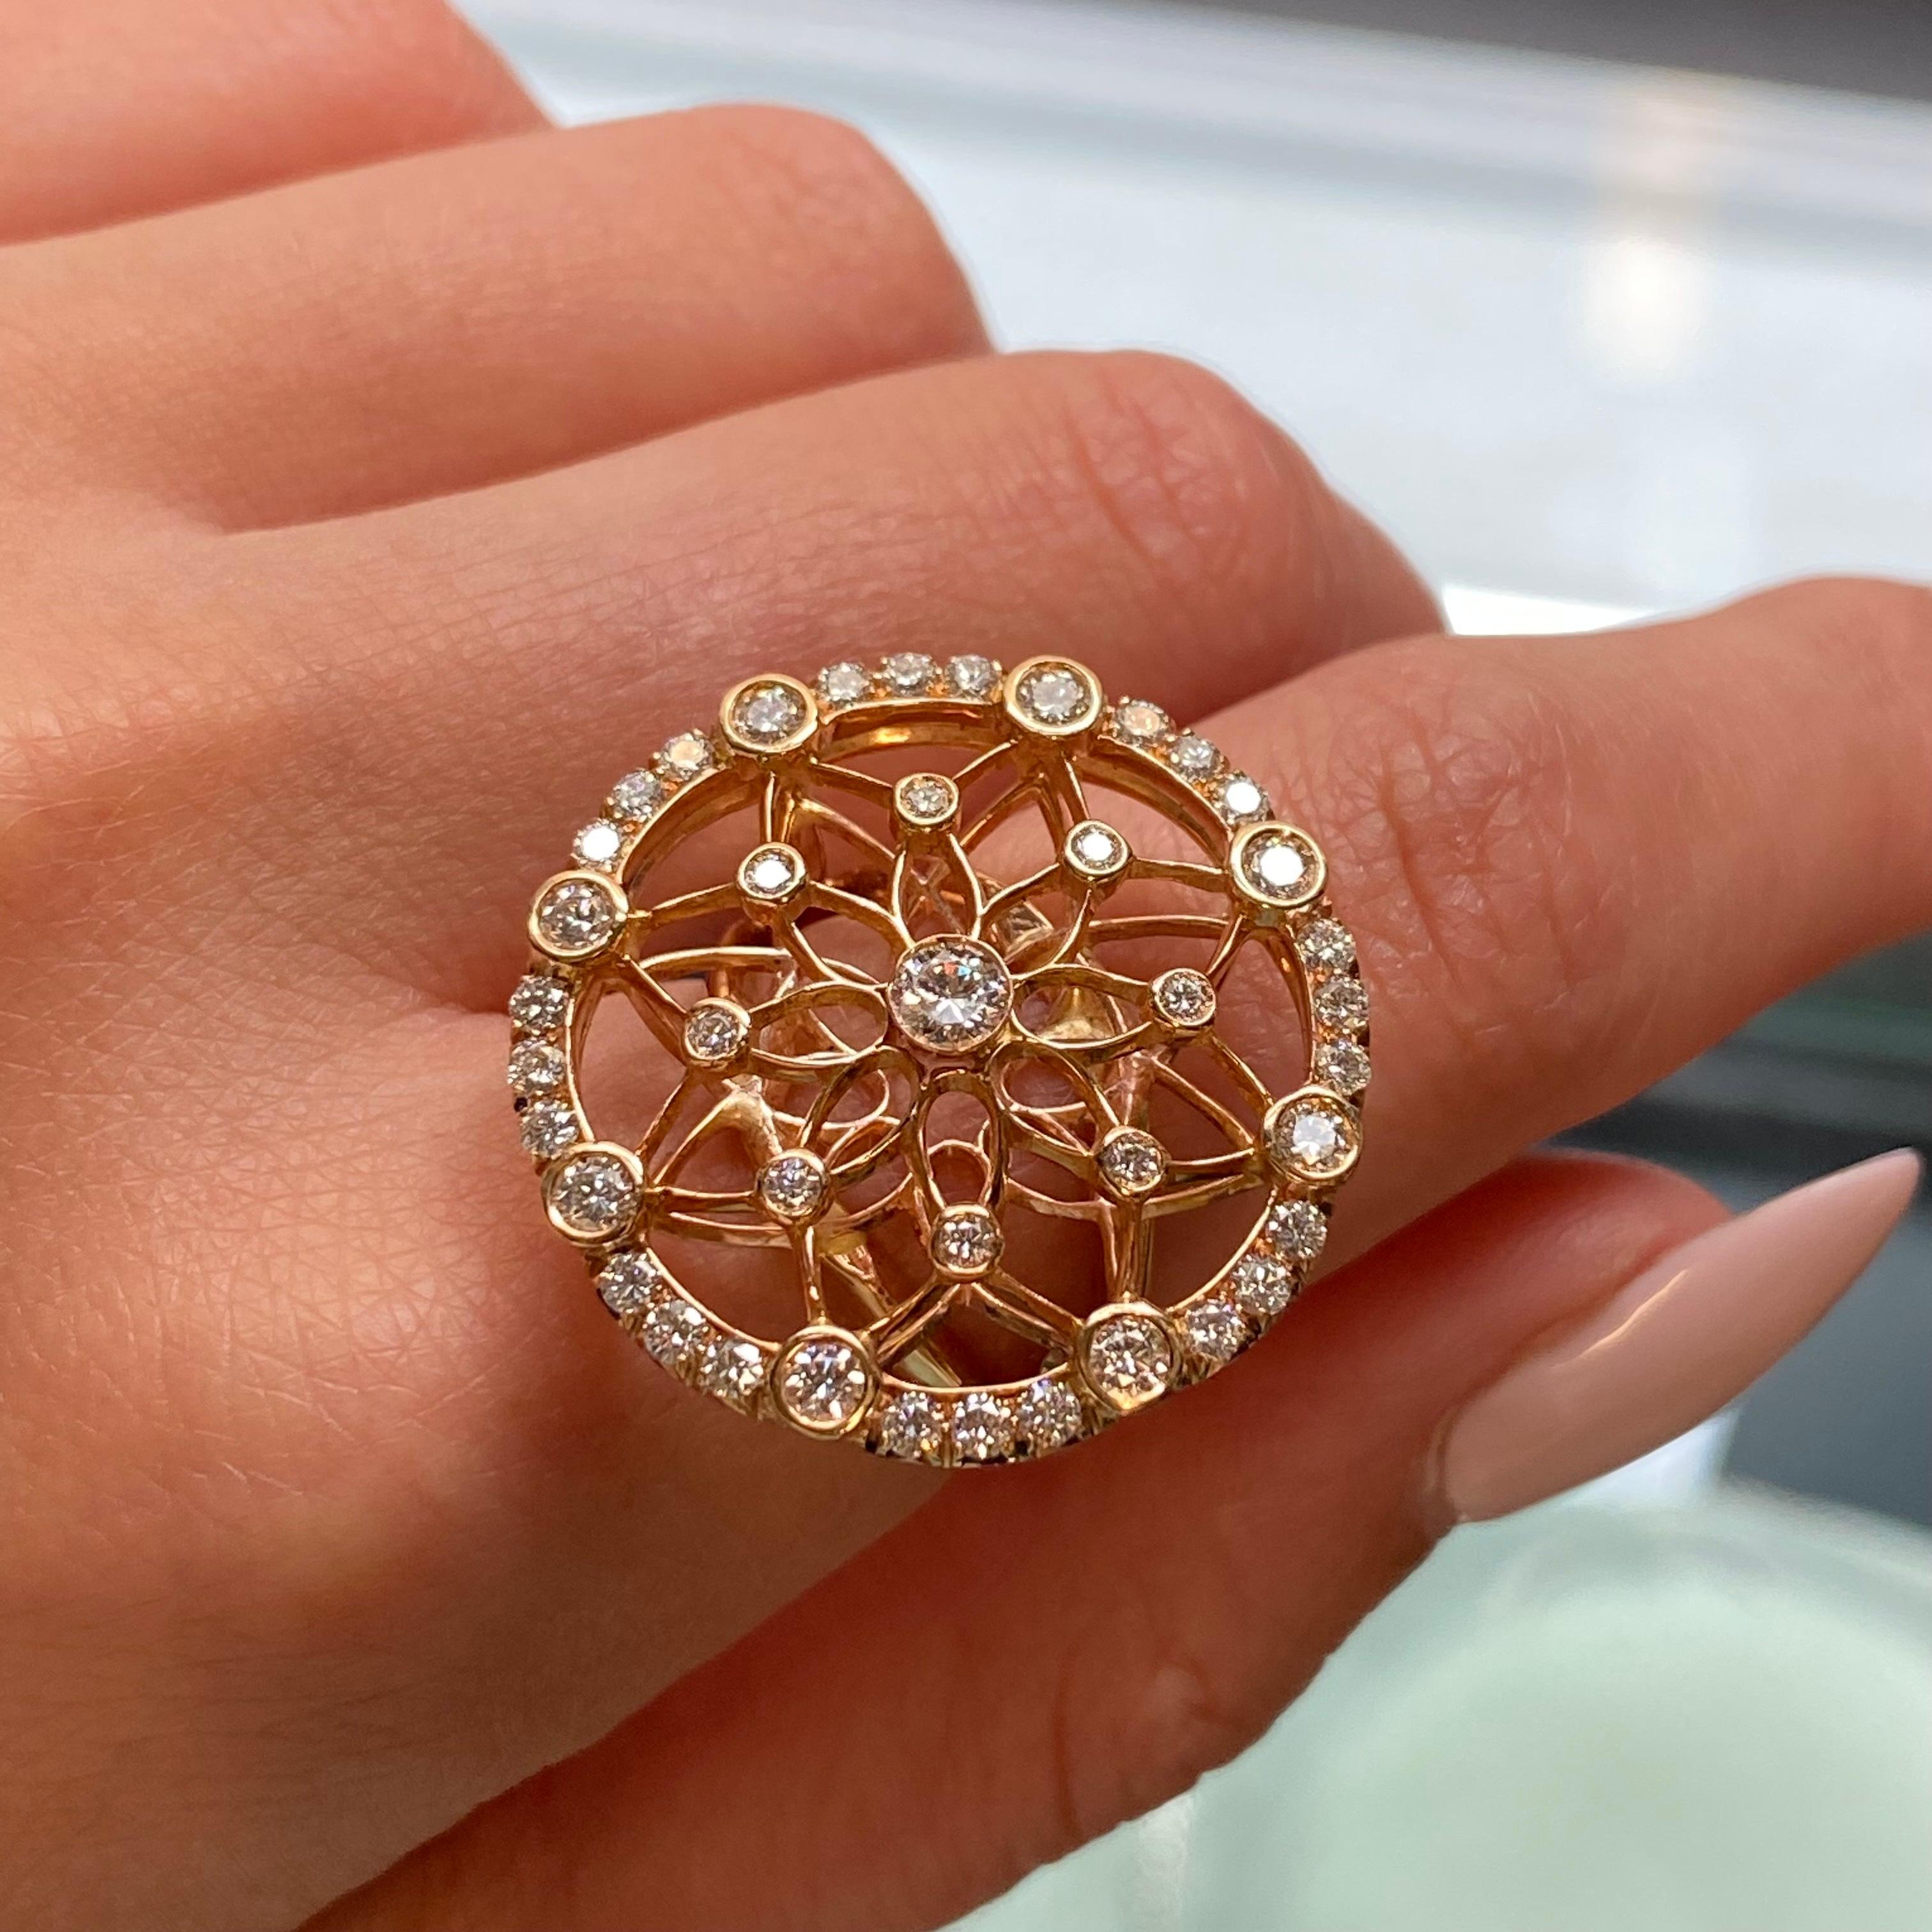 Round Cut Luca Carati Diamond Large Cocktail Ring 18K Rose Gold 1.21Cttw Size 6.75 For Sale